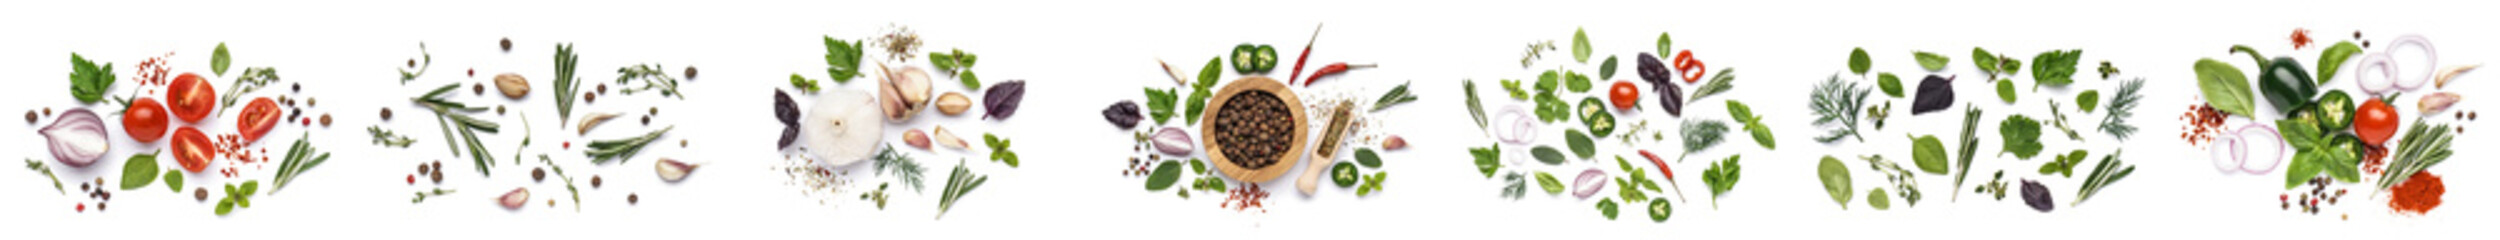 Collection of fresh aromatic herbs with spices and vegetables on white background